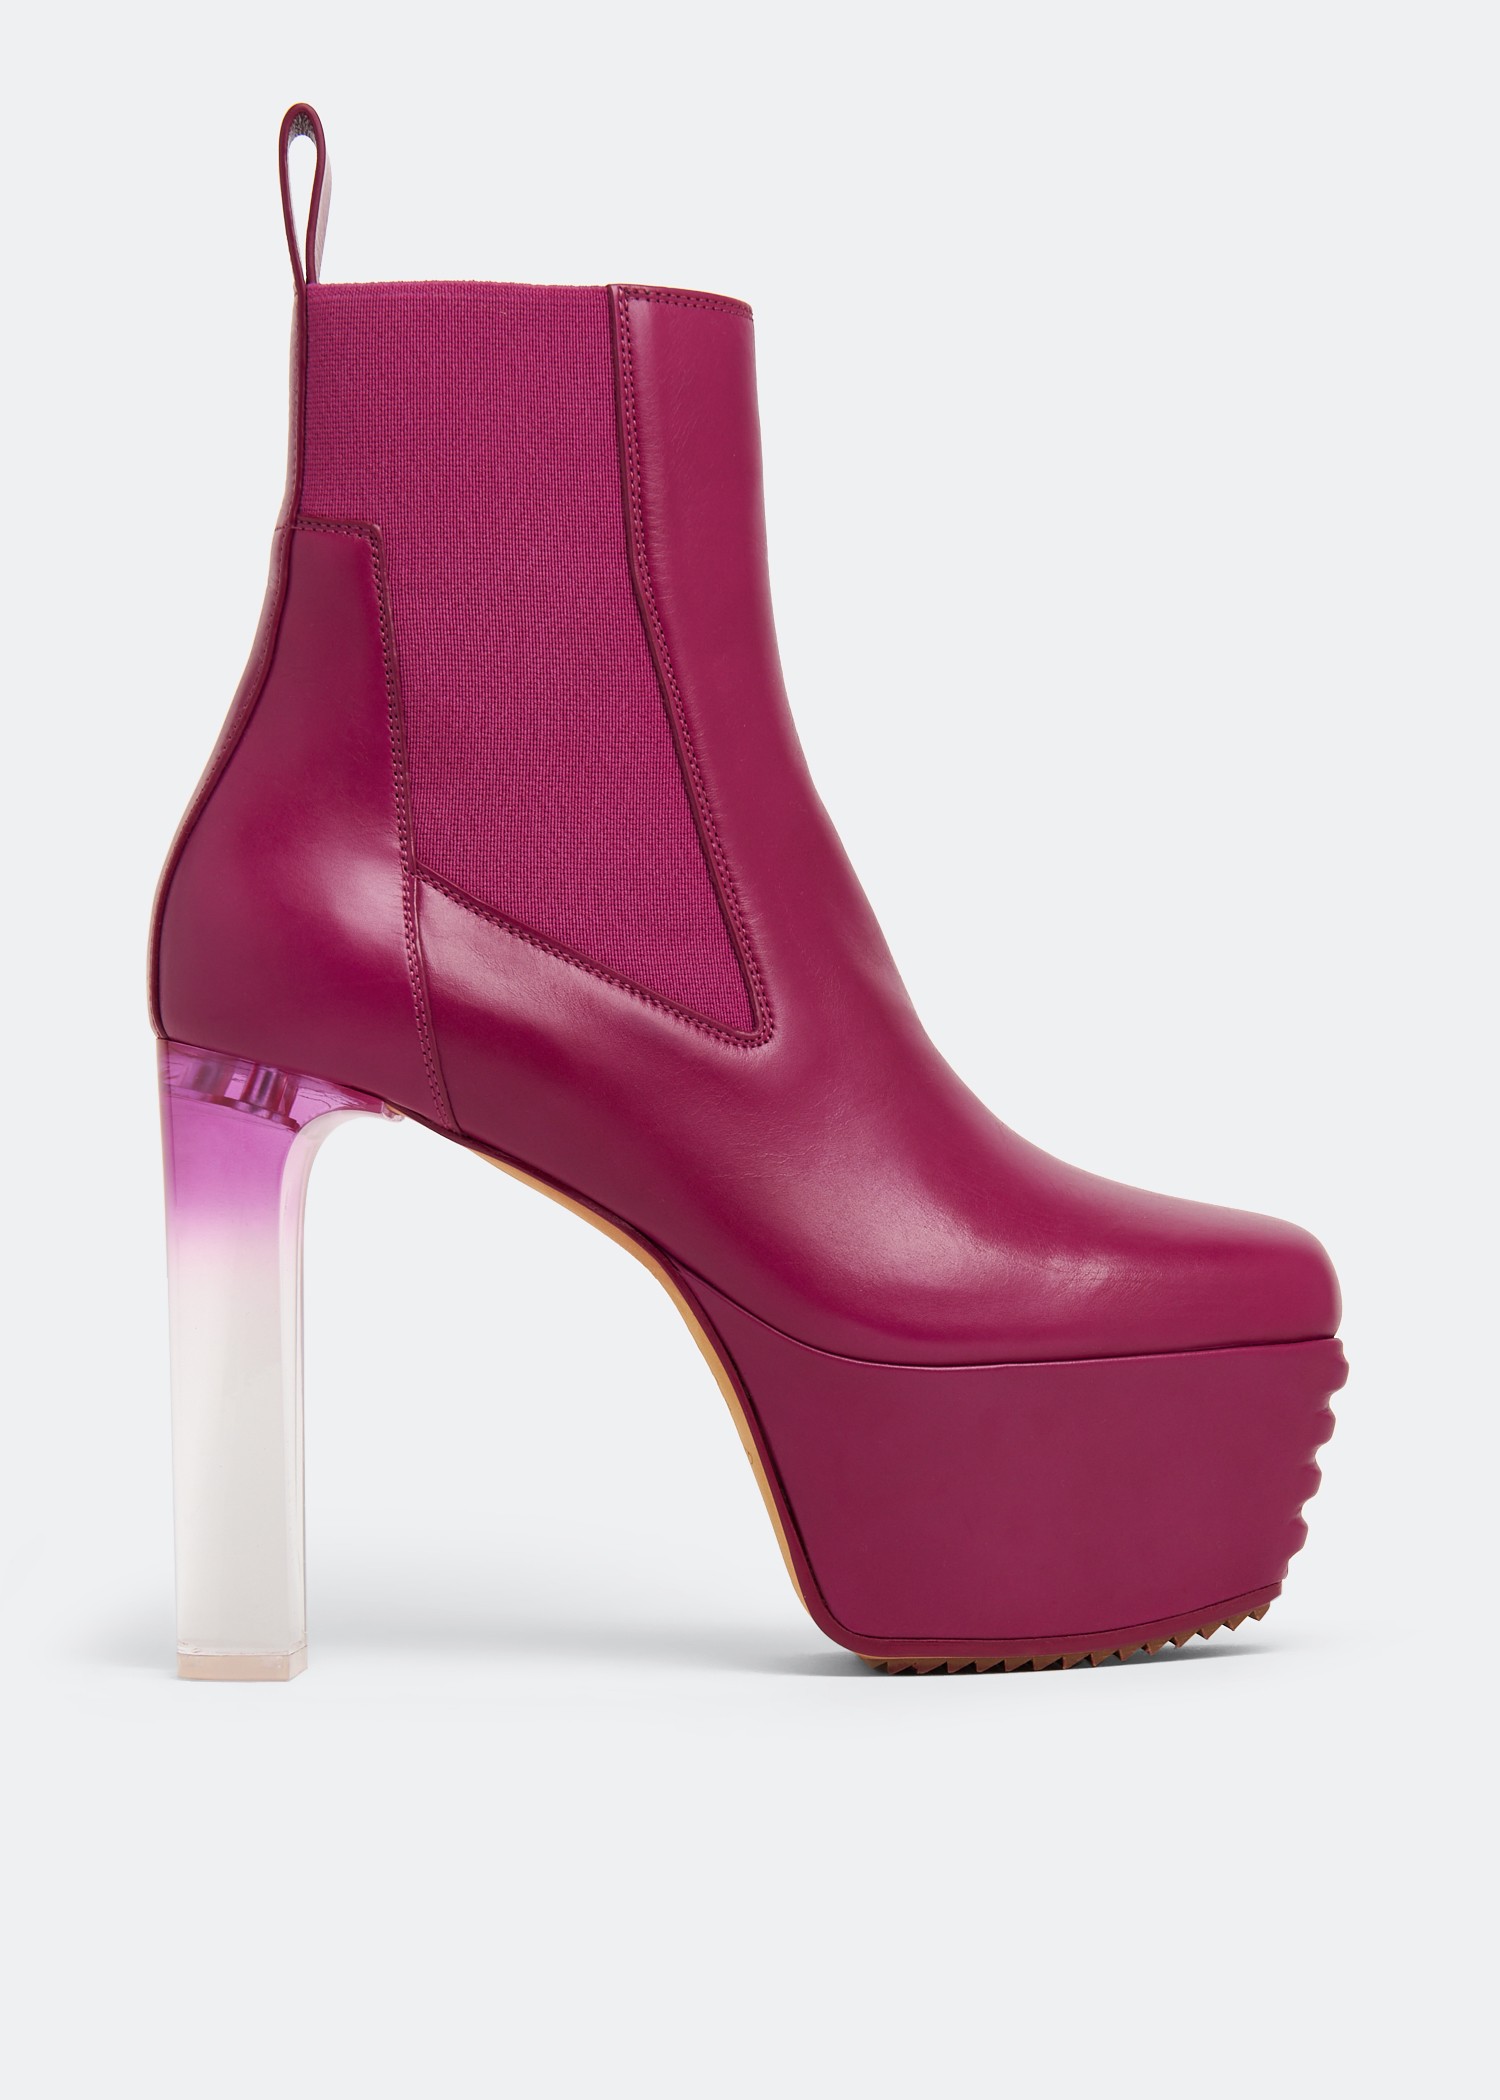 Rick Owens Minimal Grill Beatle boots for Women - Pink in KSA 